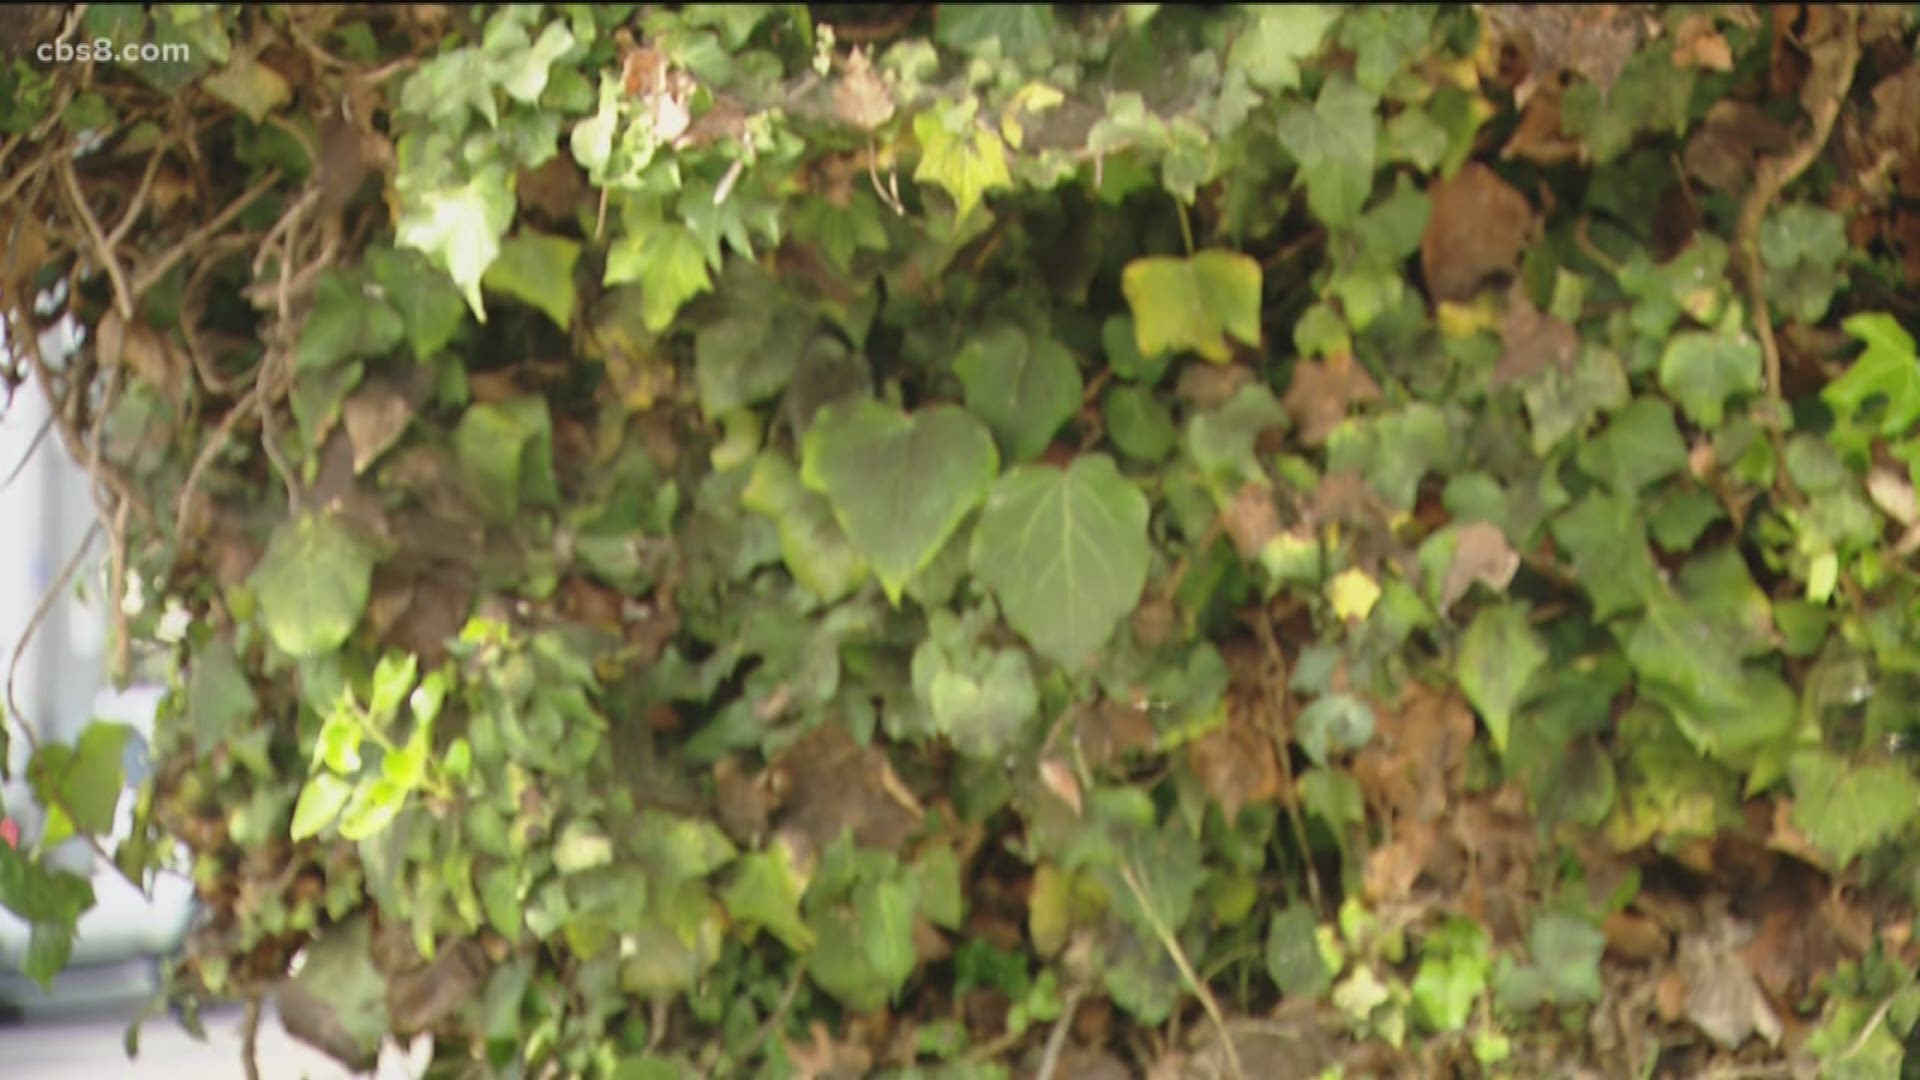 The city told News 8 that they'll be contacting the tree's owner to remove the invasive ivy.